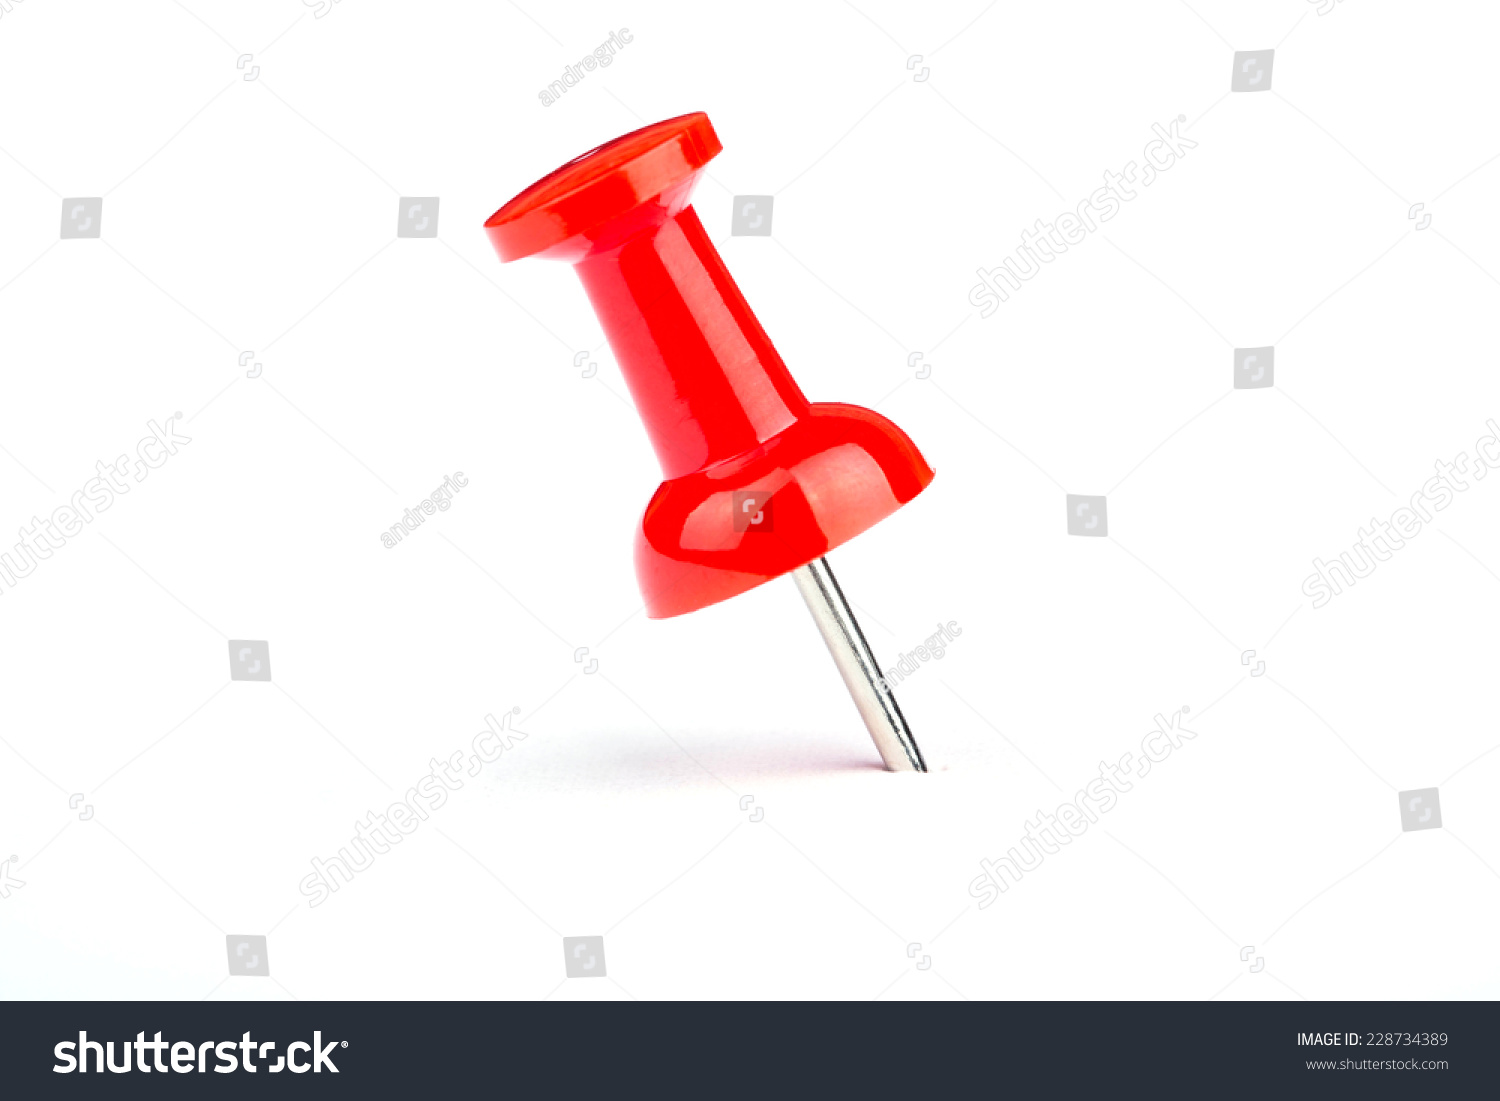 Red Pushpin On A White Background Stock Photo 228734389 : Shutterstock